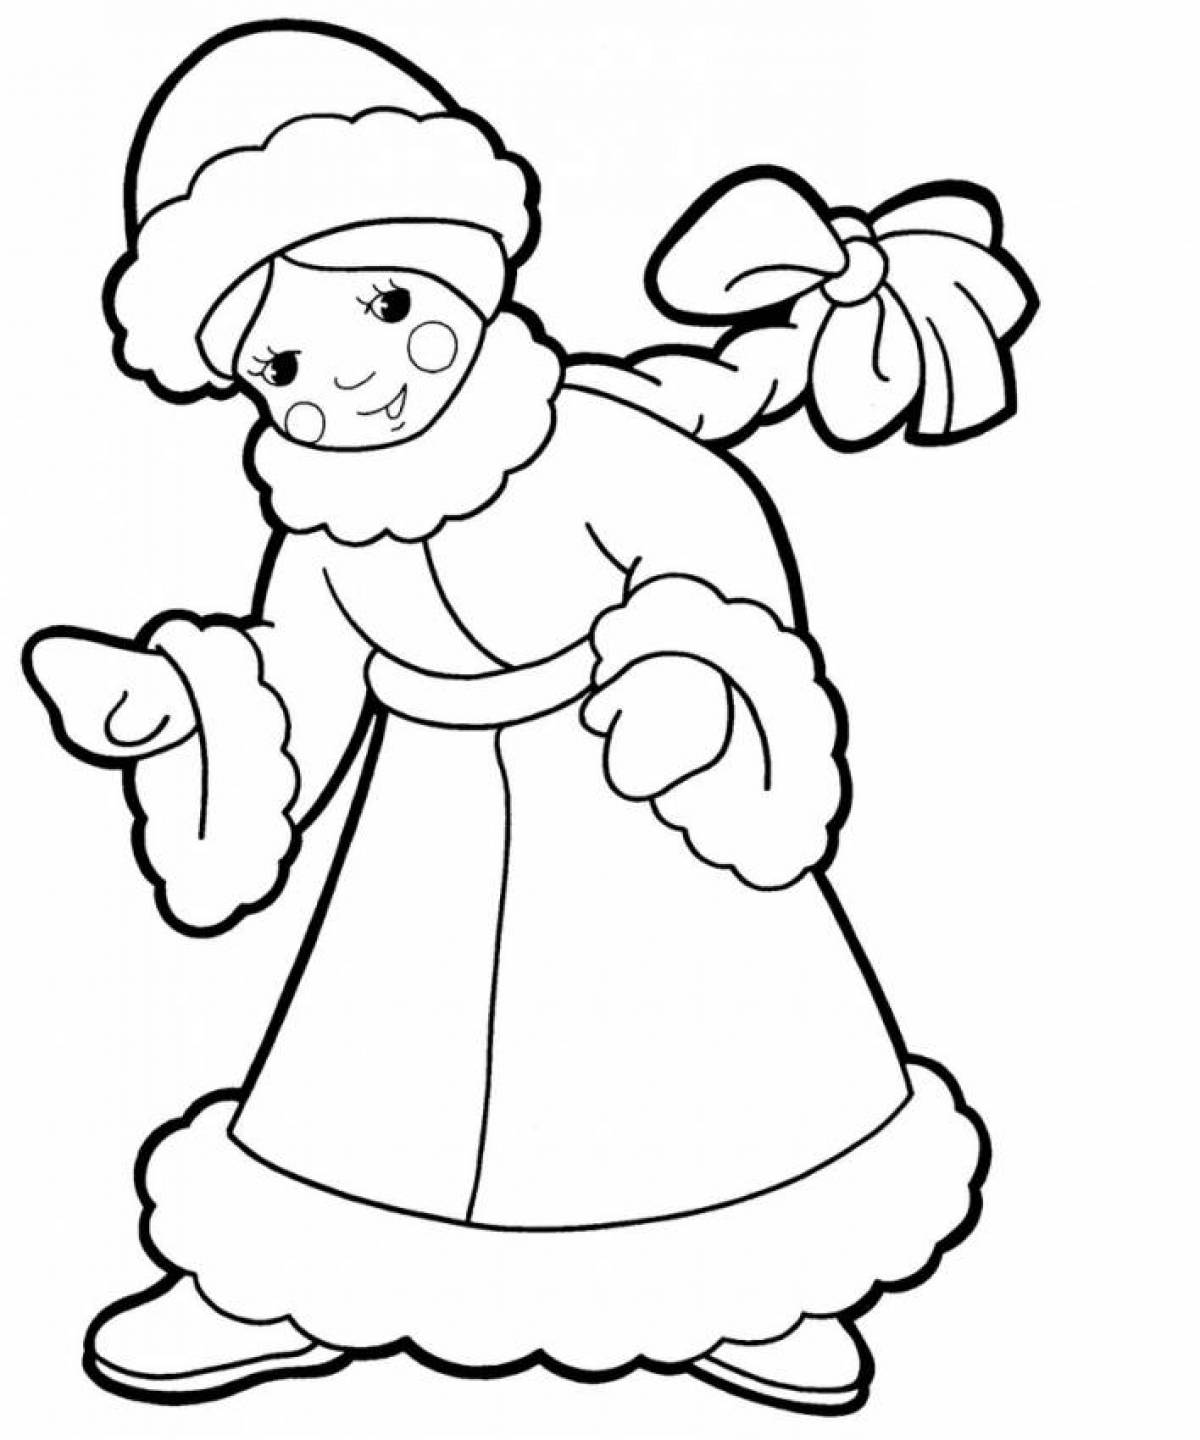 Snow Maiden in a warm outfit